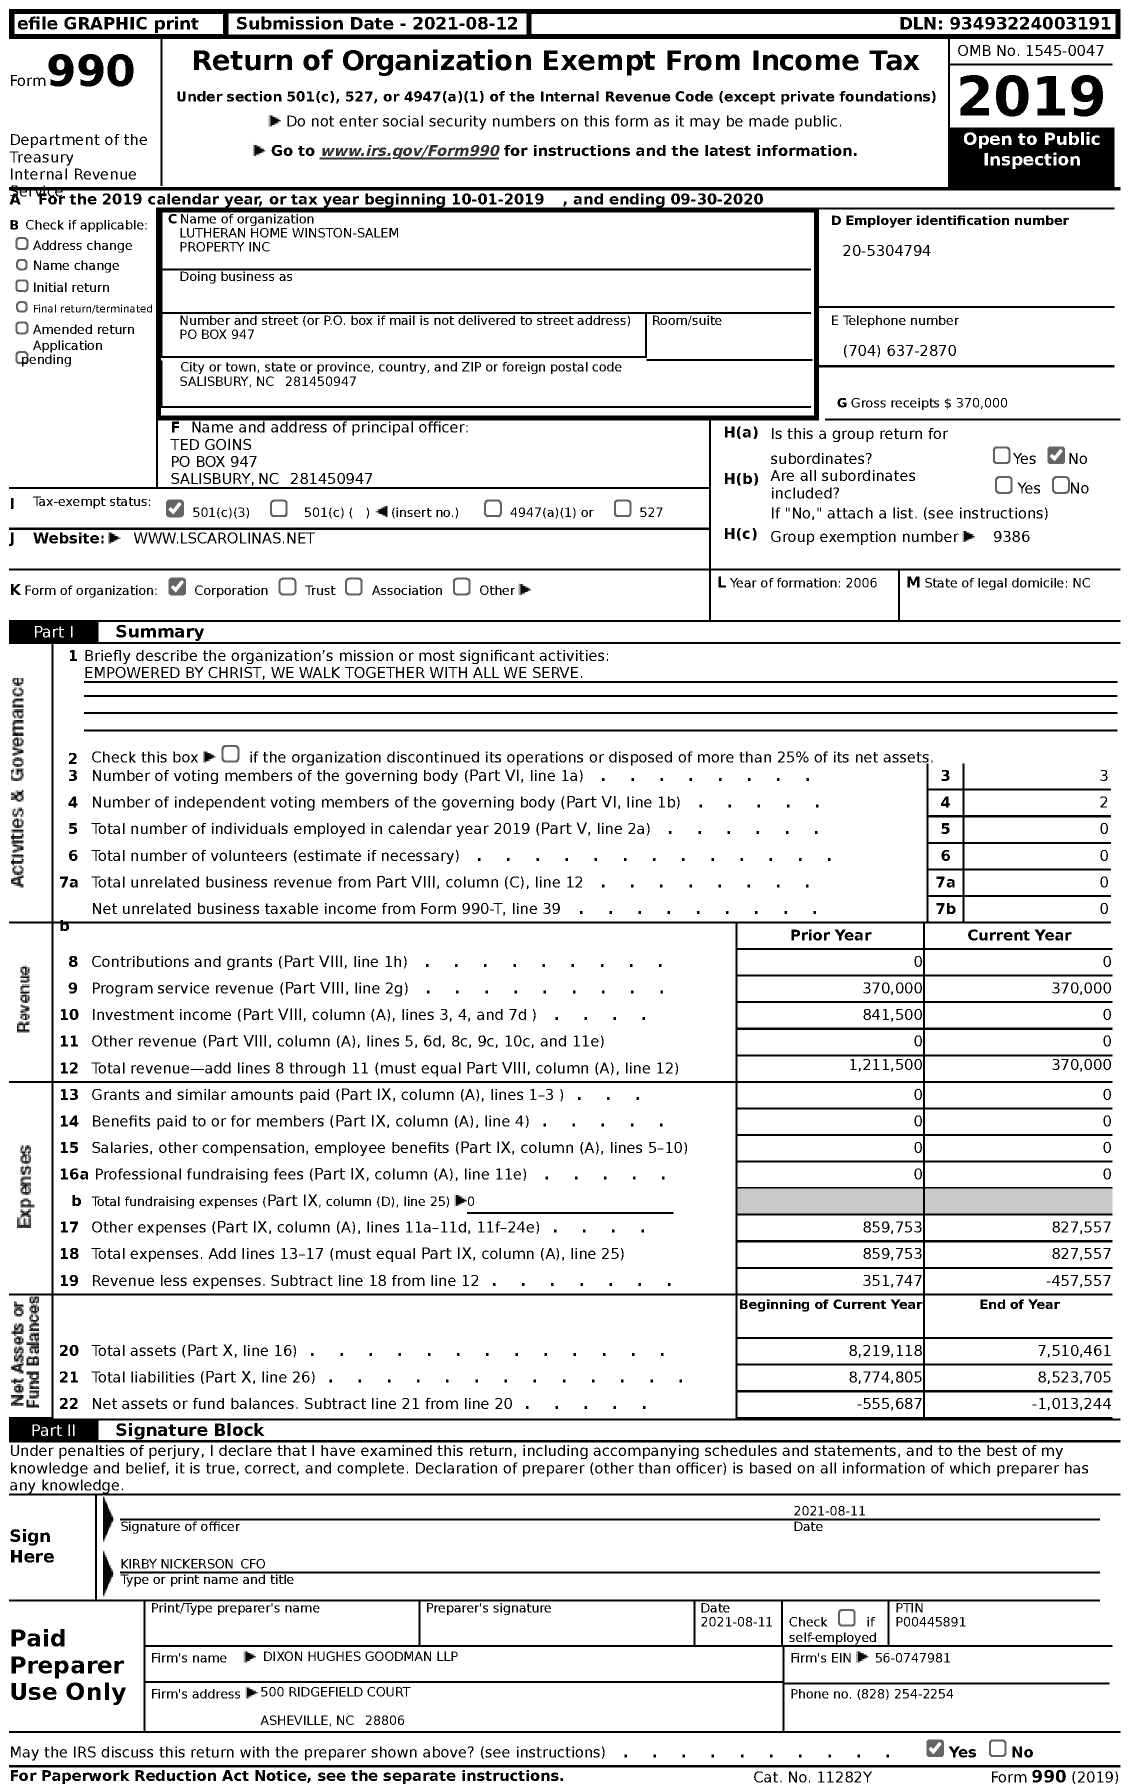 Image of first page of 2019 Form 990 for Lutheran Home Winston-Salem Property